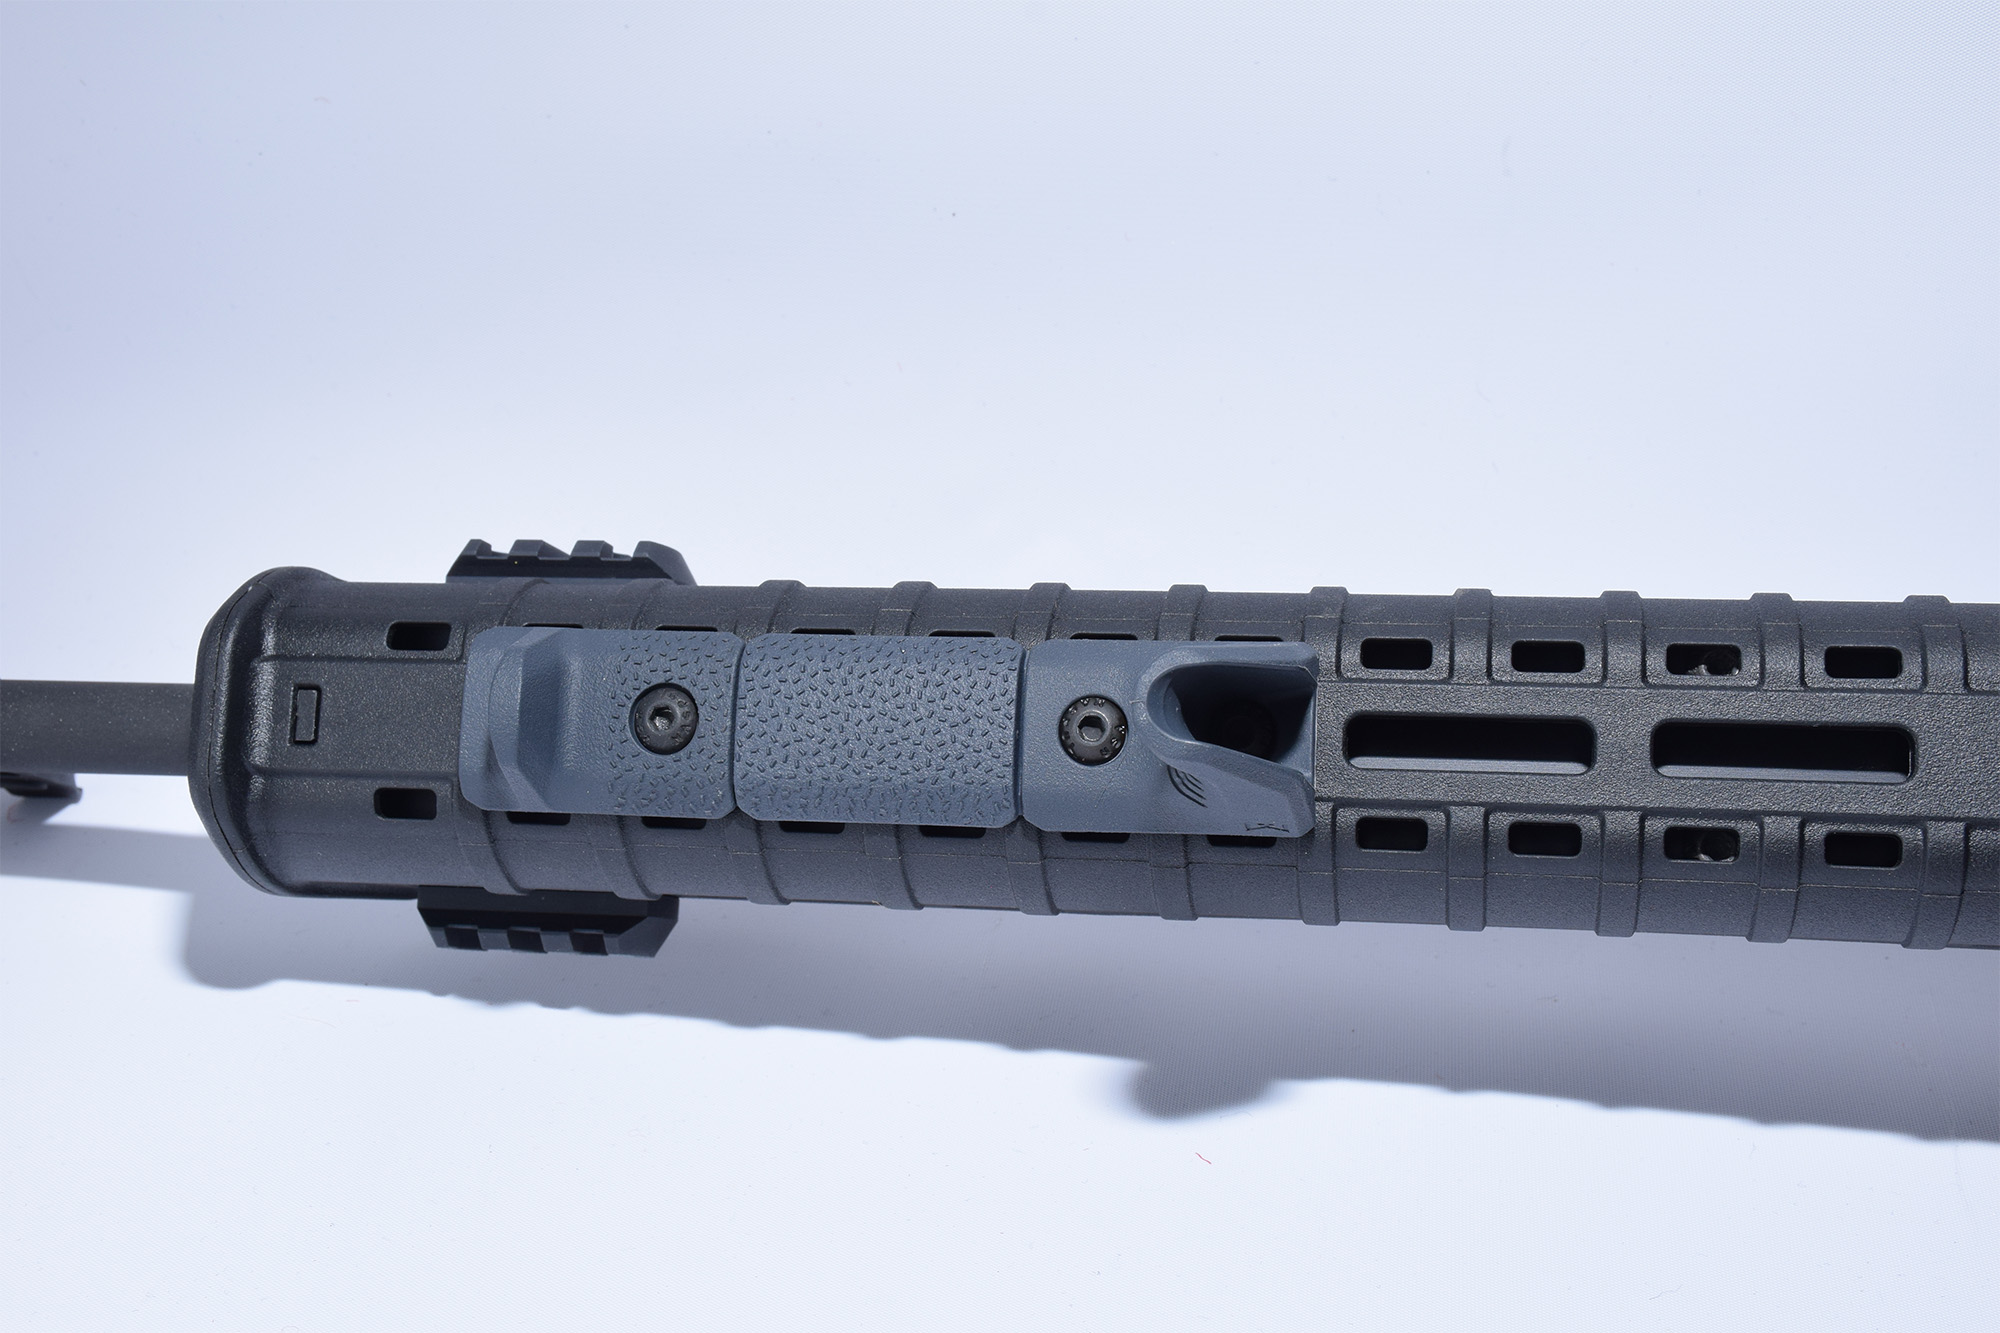 The Zhukov handguard’s forward M-LOK slots are perfect for mounting somethi...